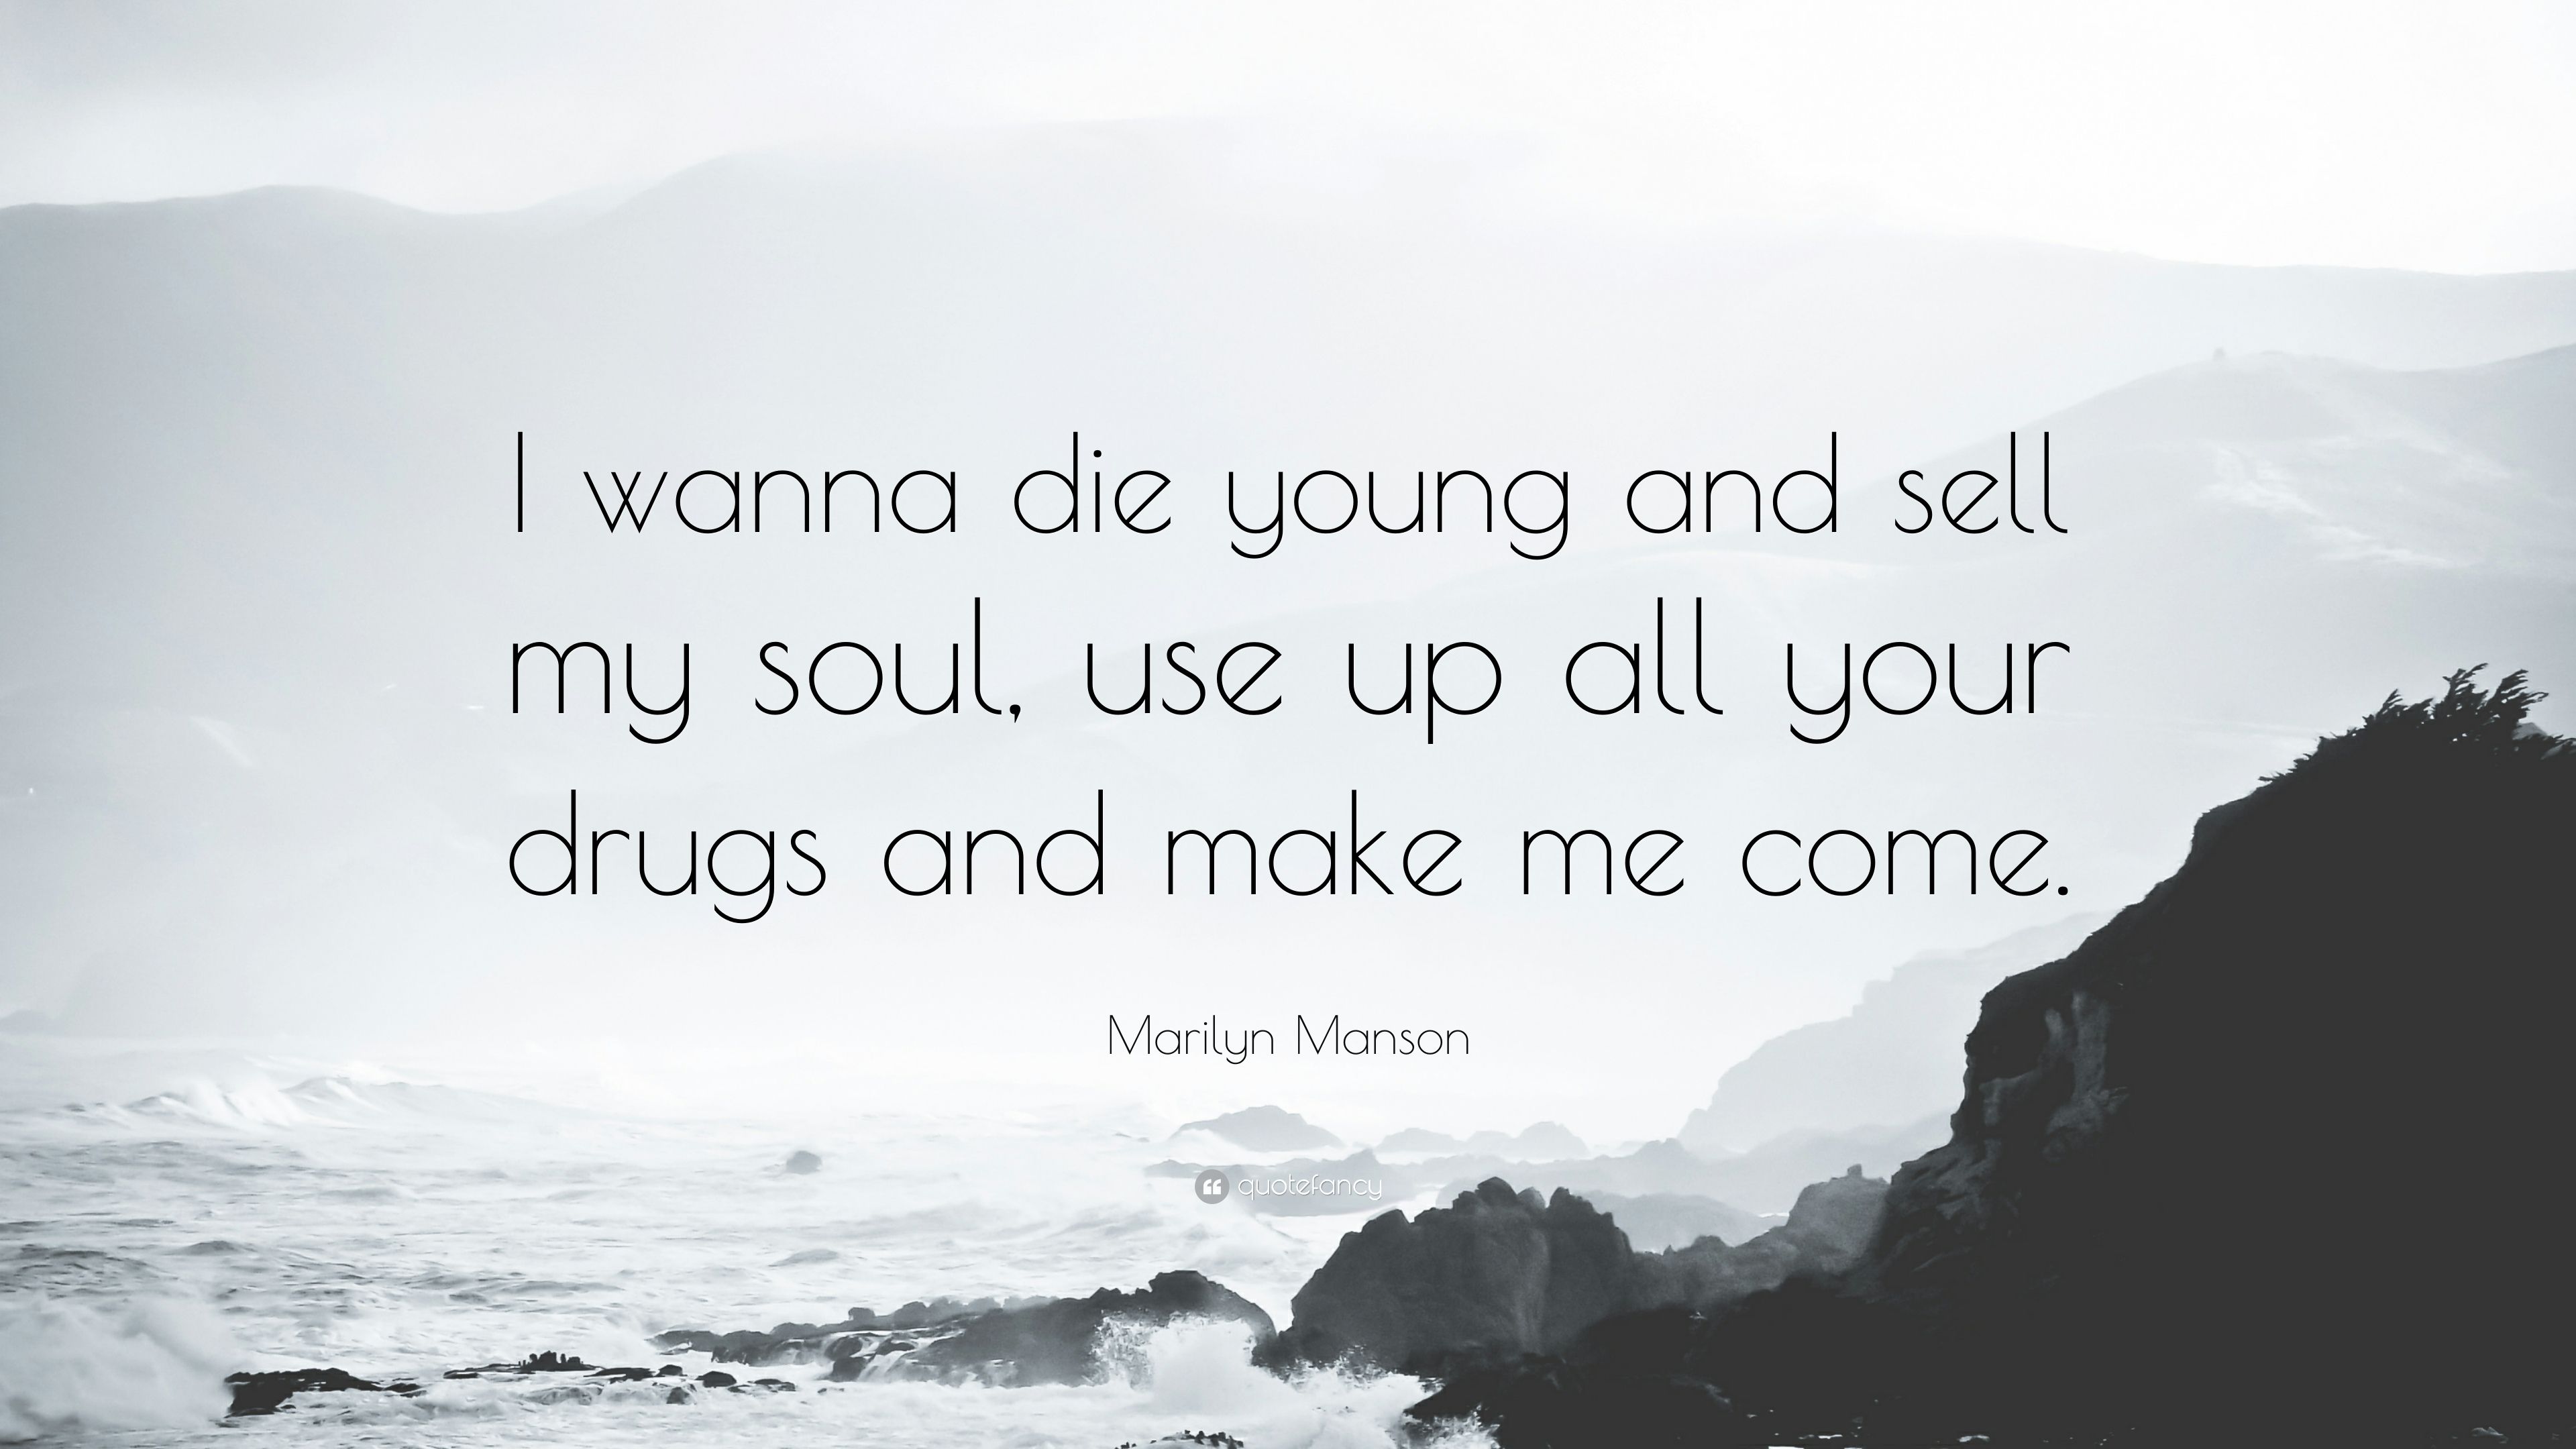 Marilyn Manson Quote: “I wanna die young and sell my soul, use up